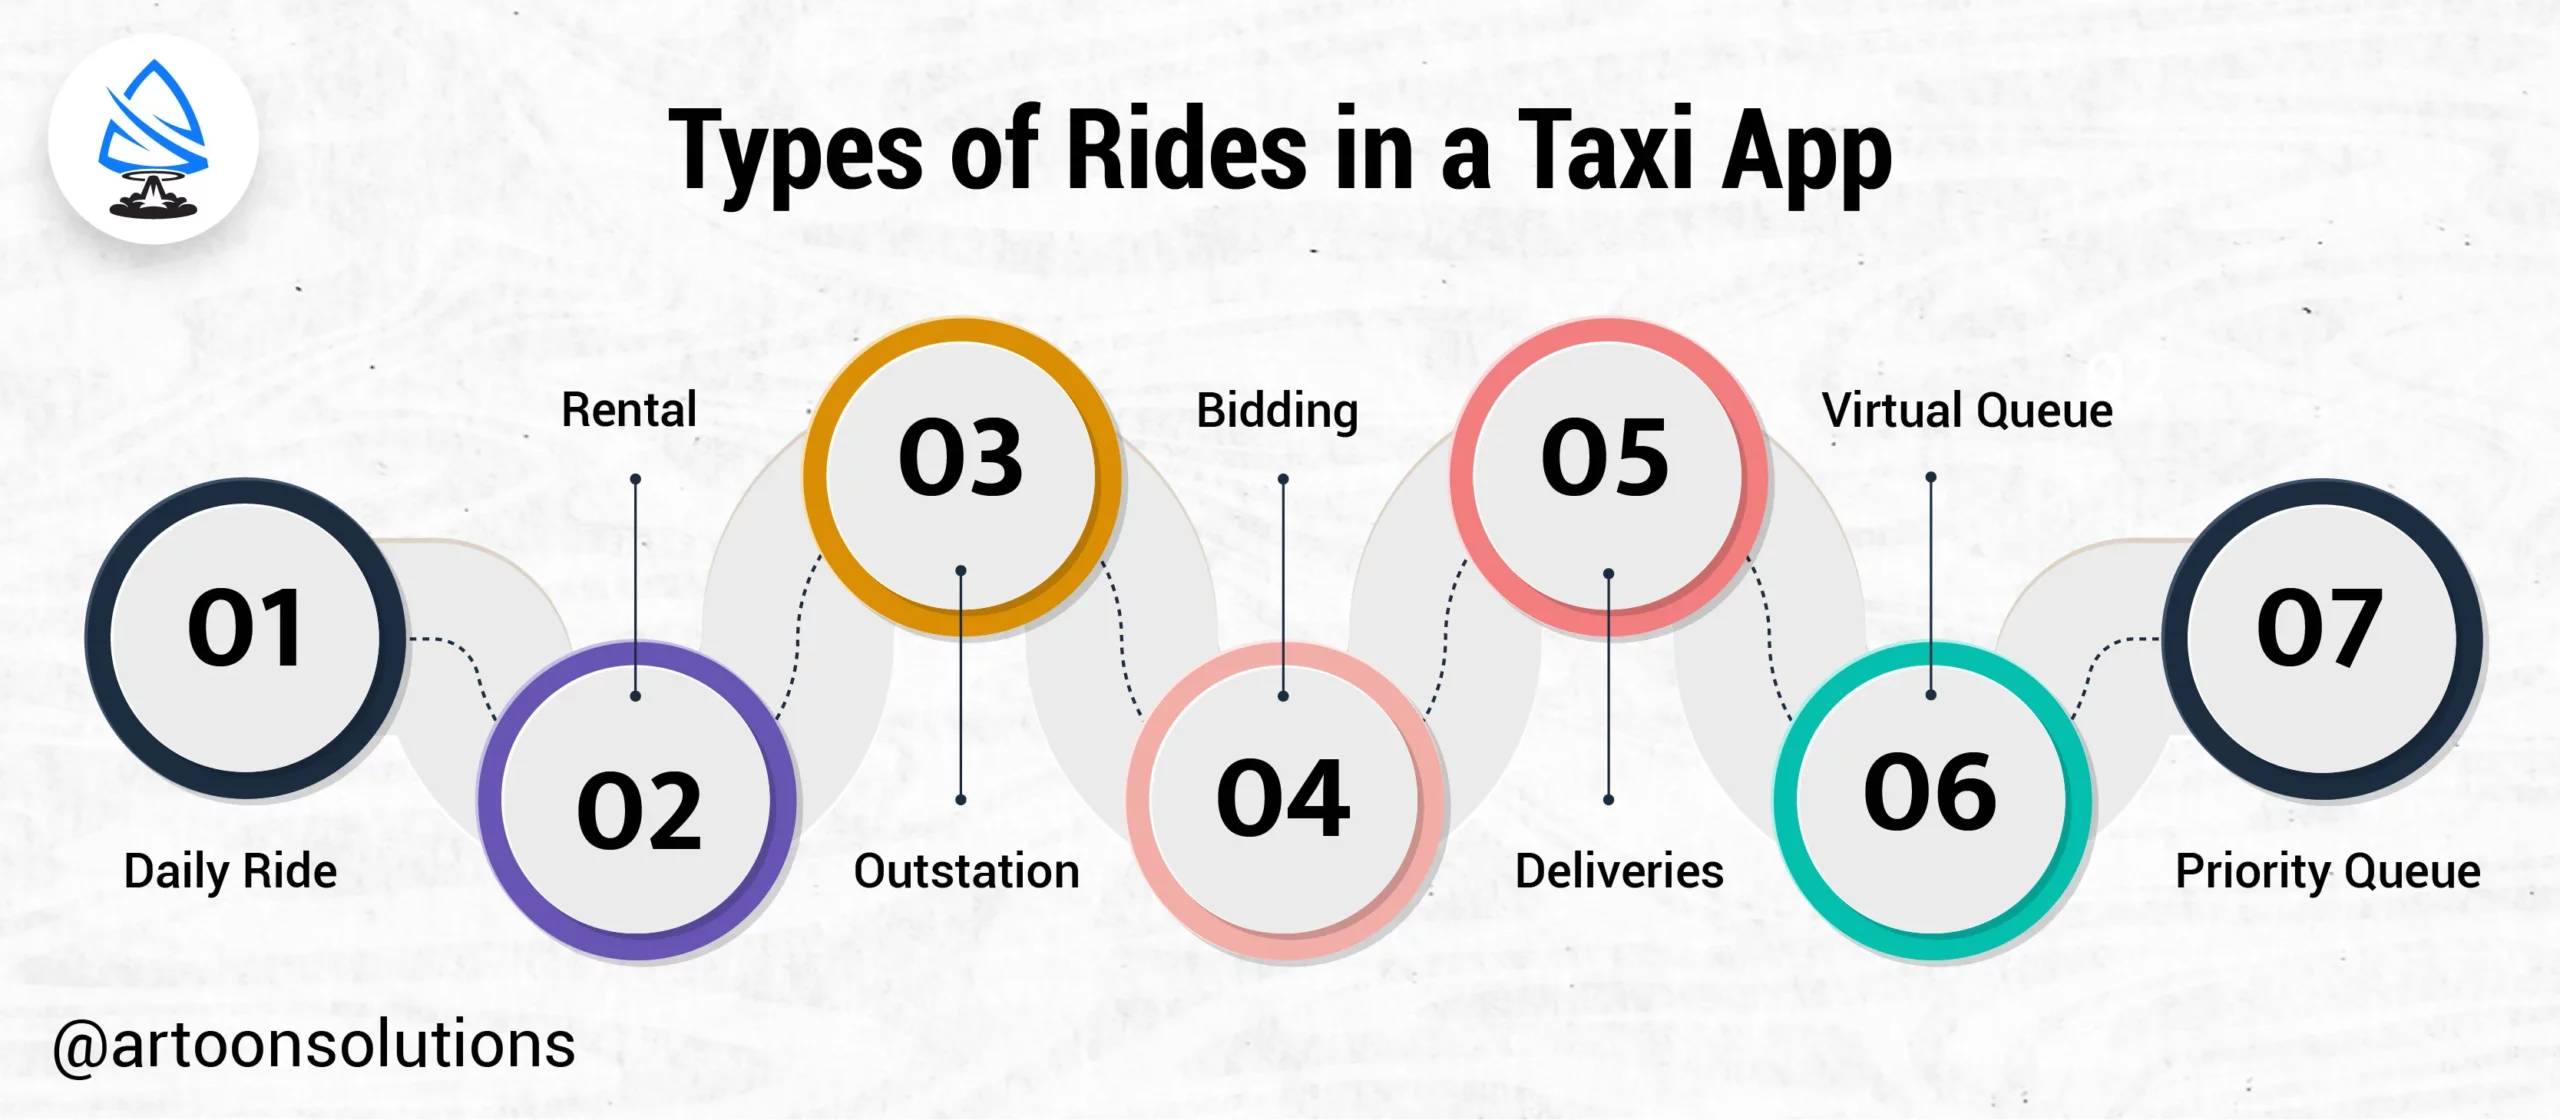 Types of Rides in a Taxi App